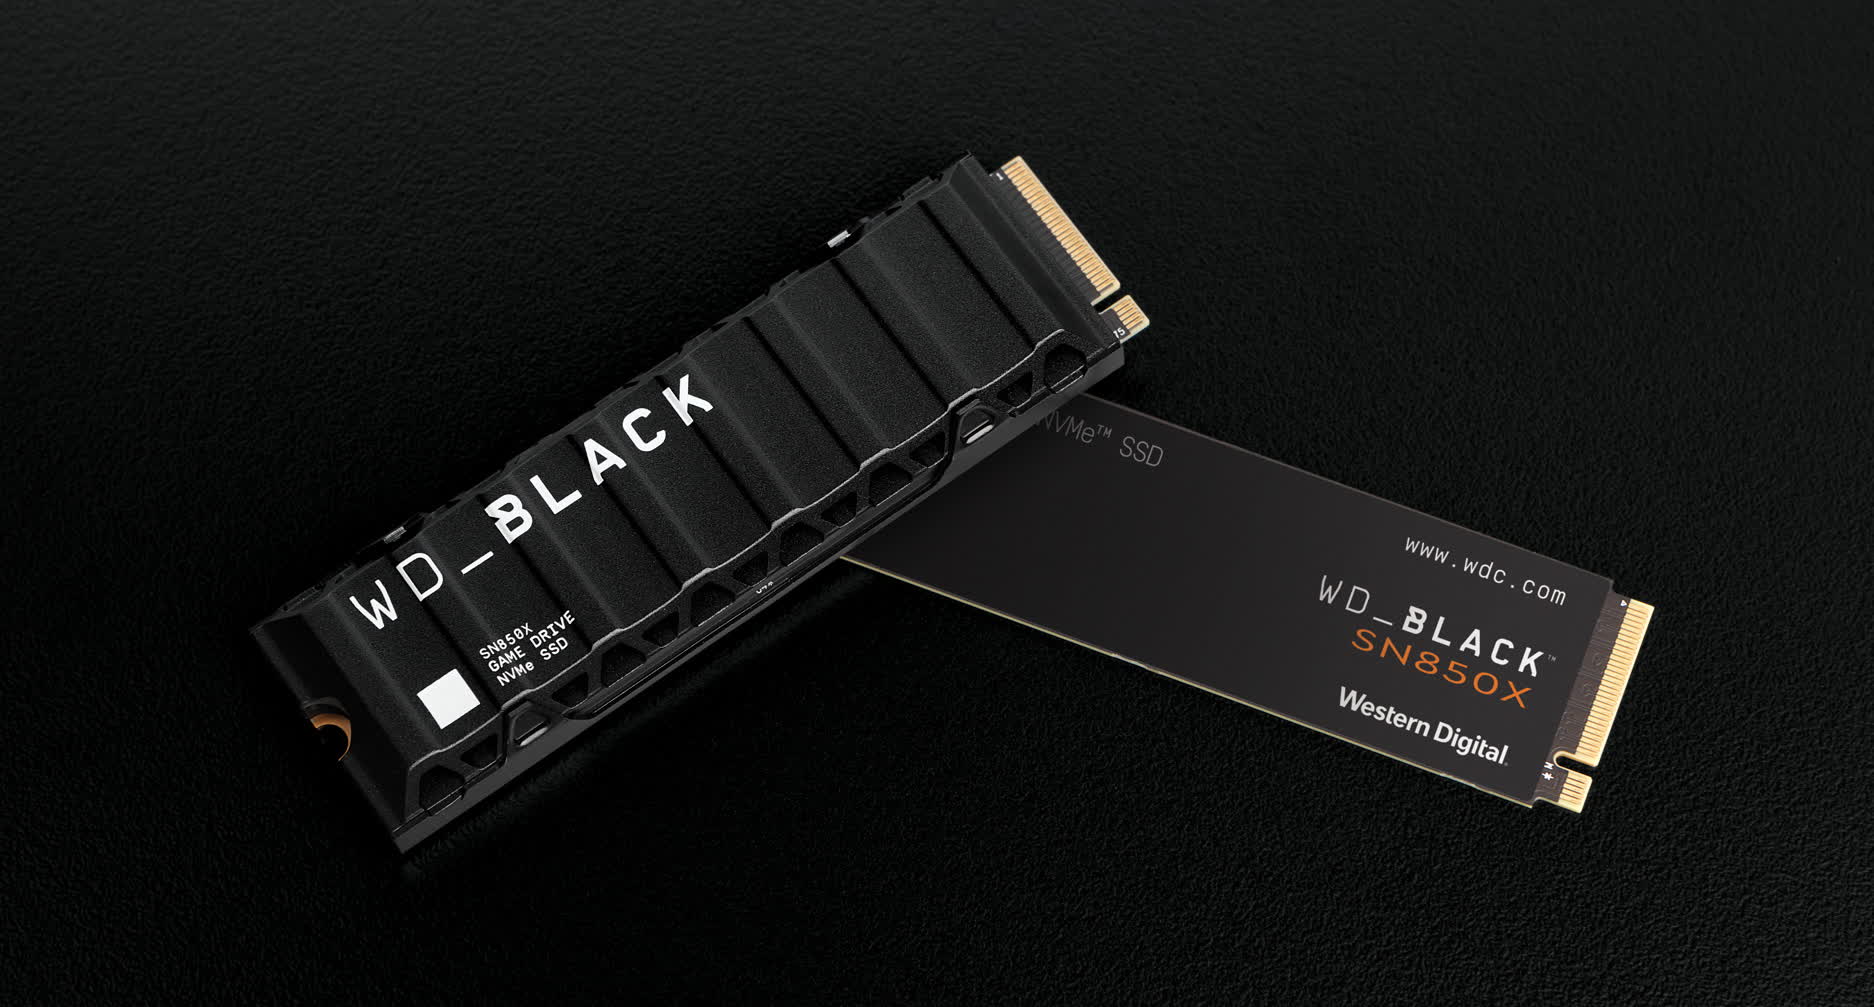 Western Digital's latest PCIe 4.0 SSD boasts 'predictive loading' and adaptive thermals